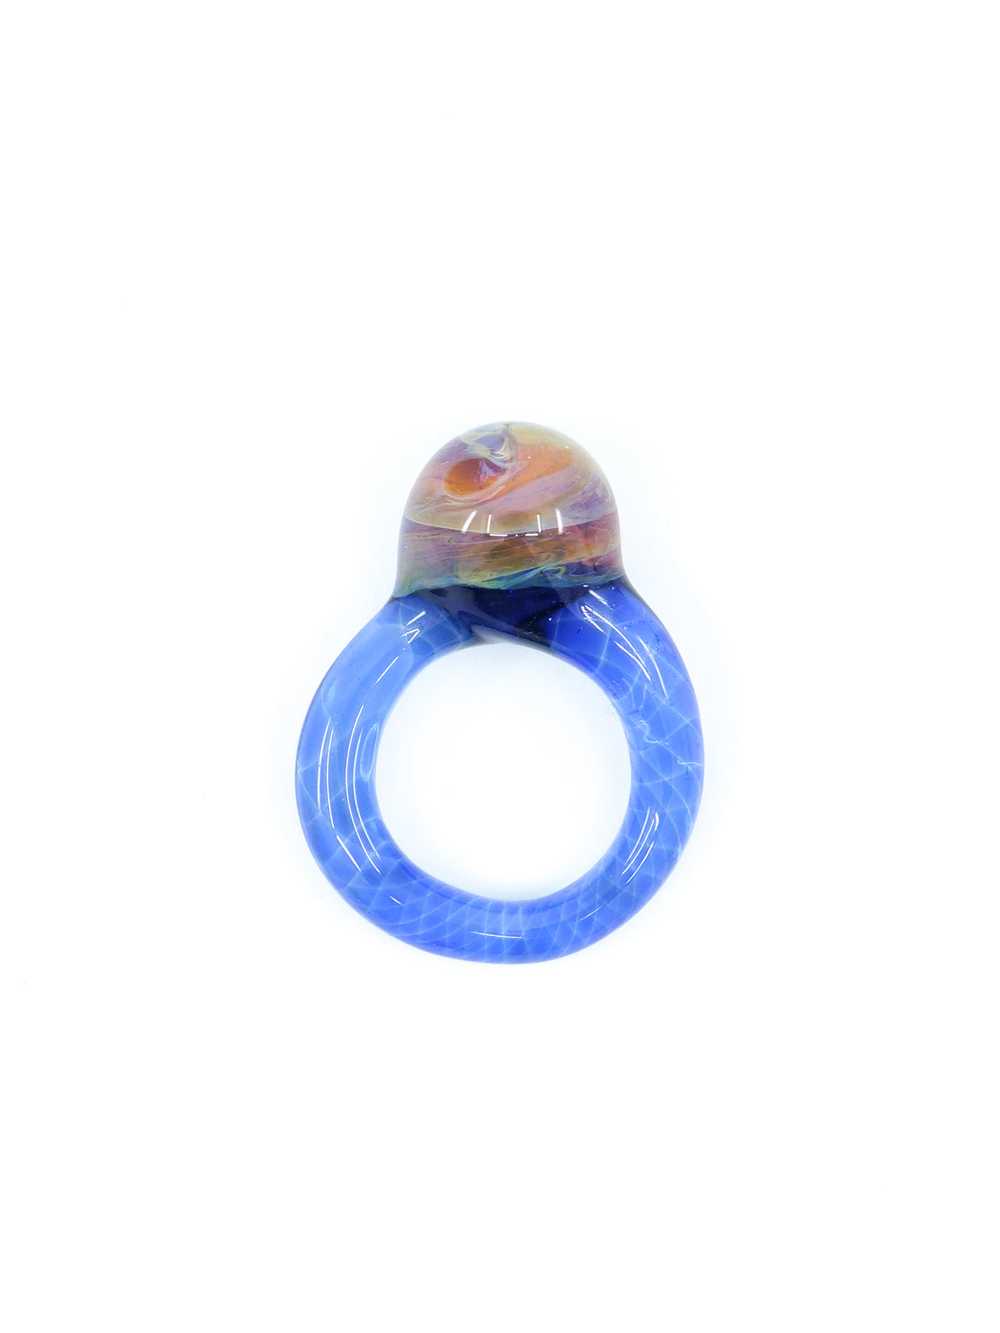 Blue Glass Dome Ring - image 4